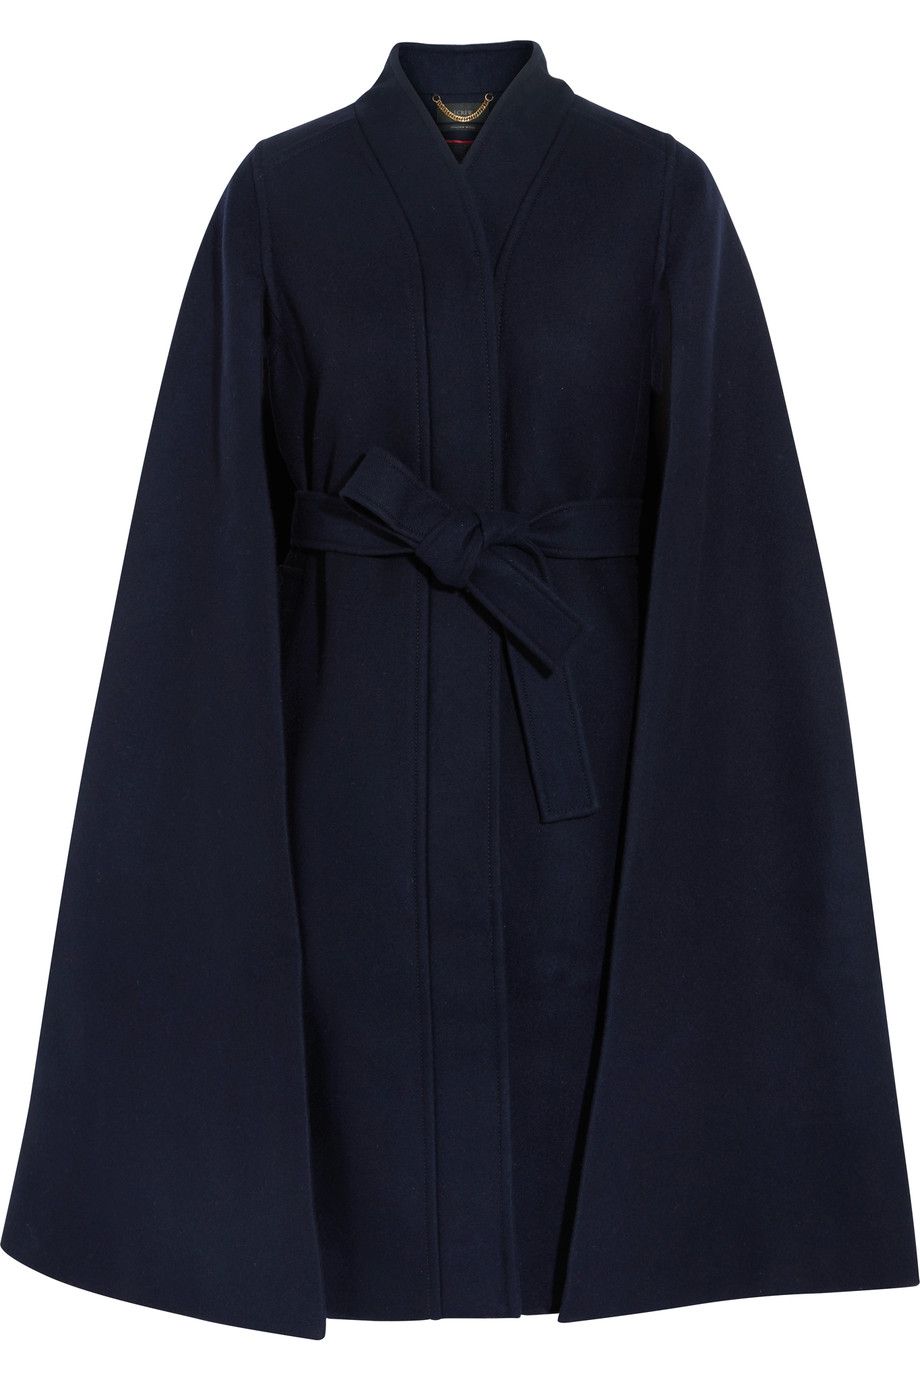 A wool cape coat for refreshing silhouette by J.Crew